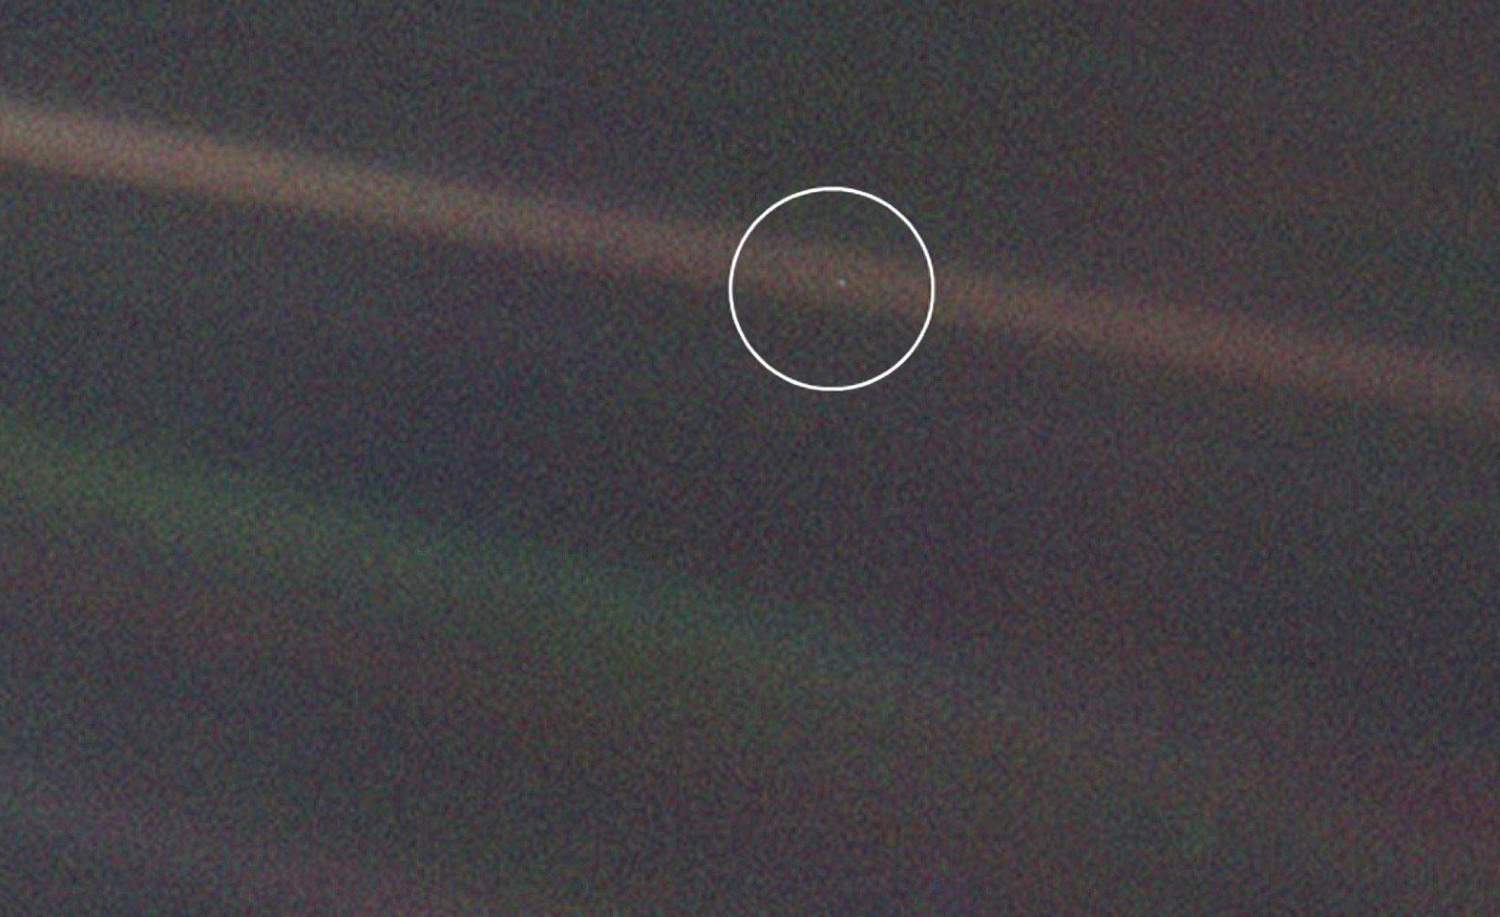 Most Iconic Photos of Earth from Space: Pale Blue Dot